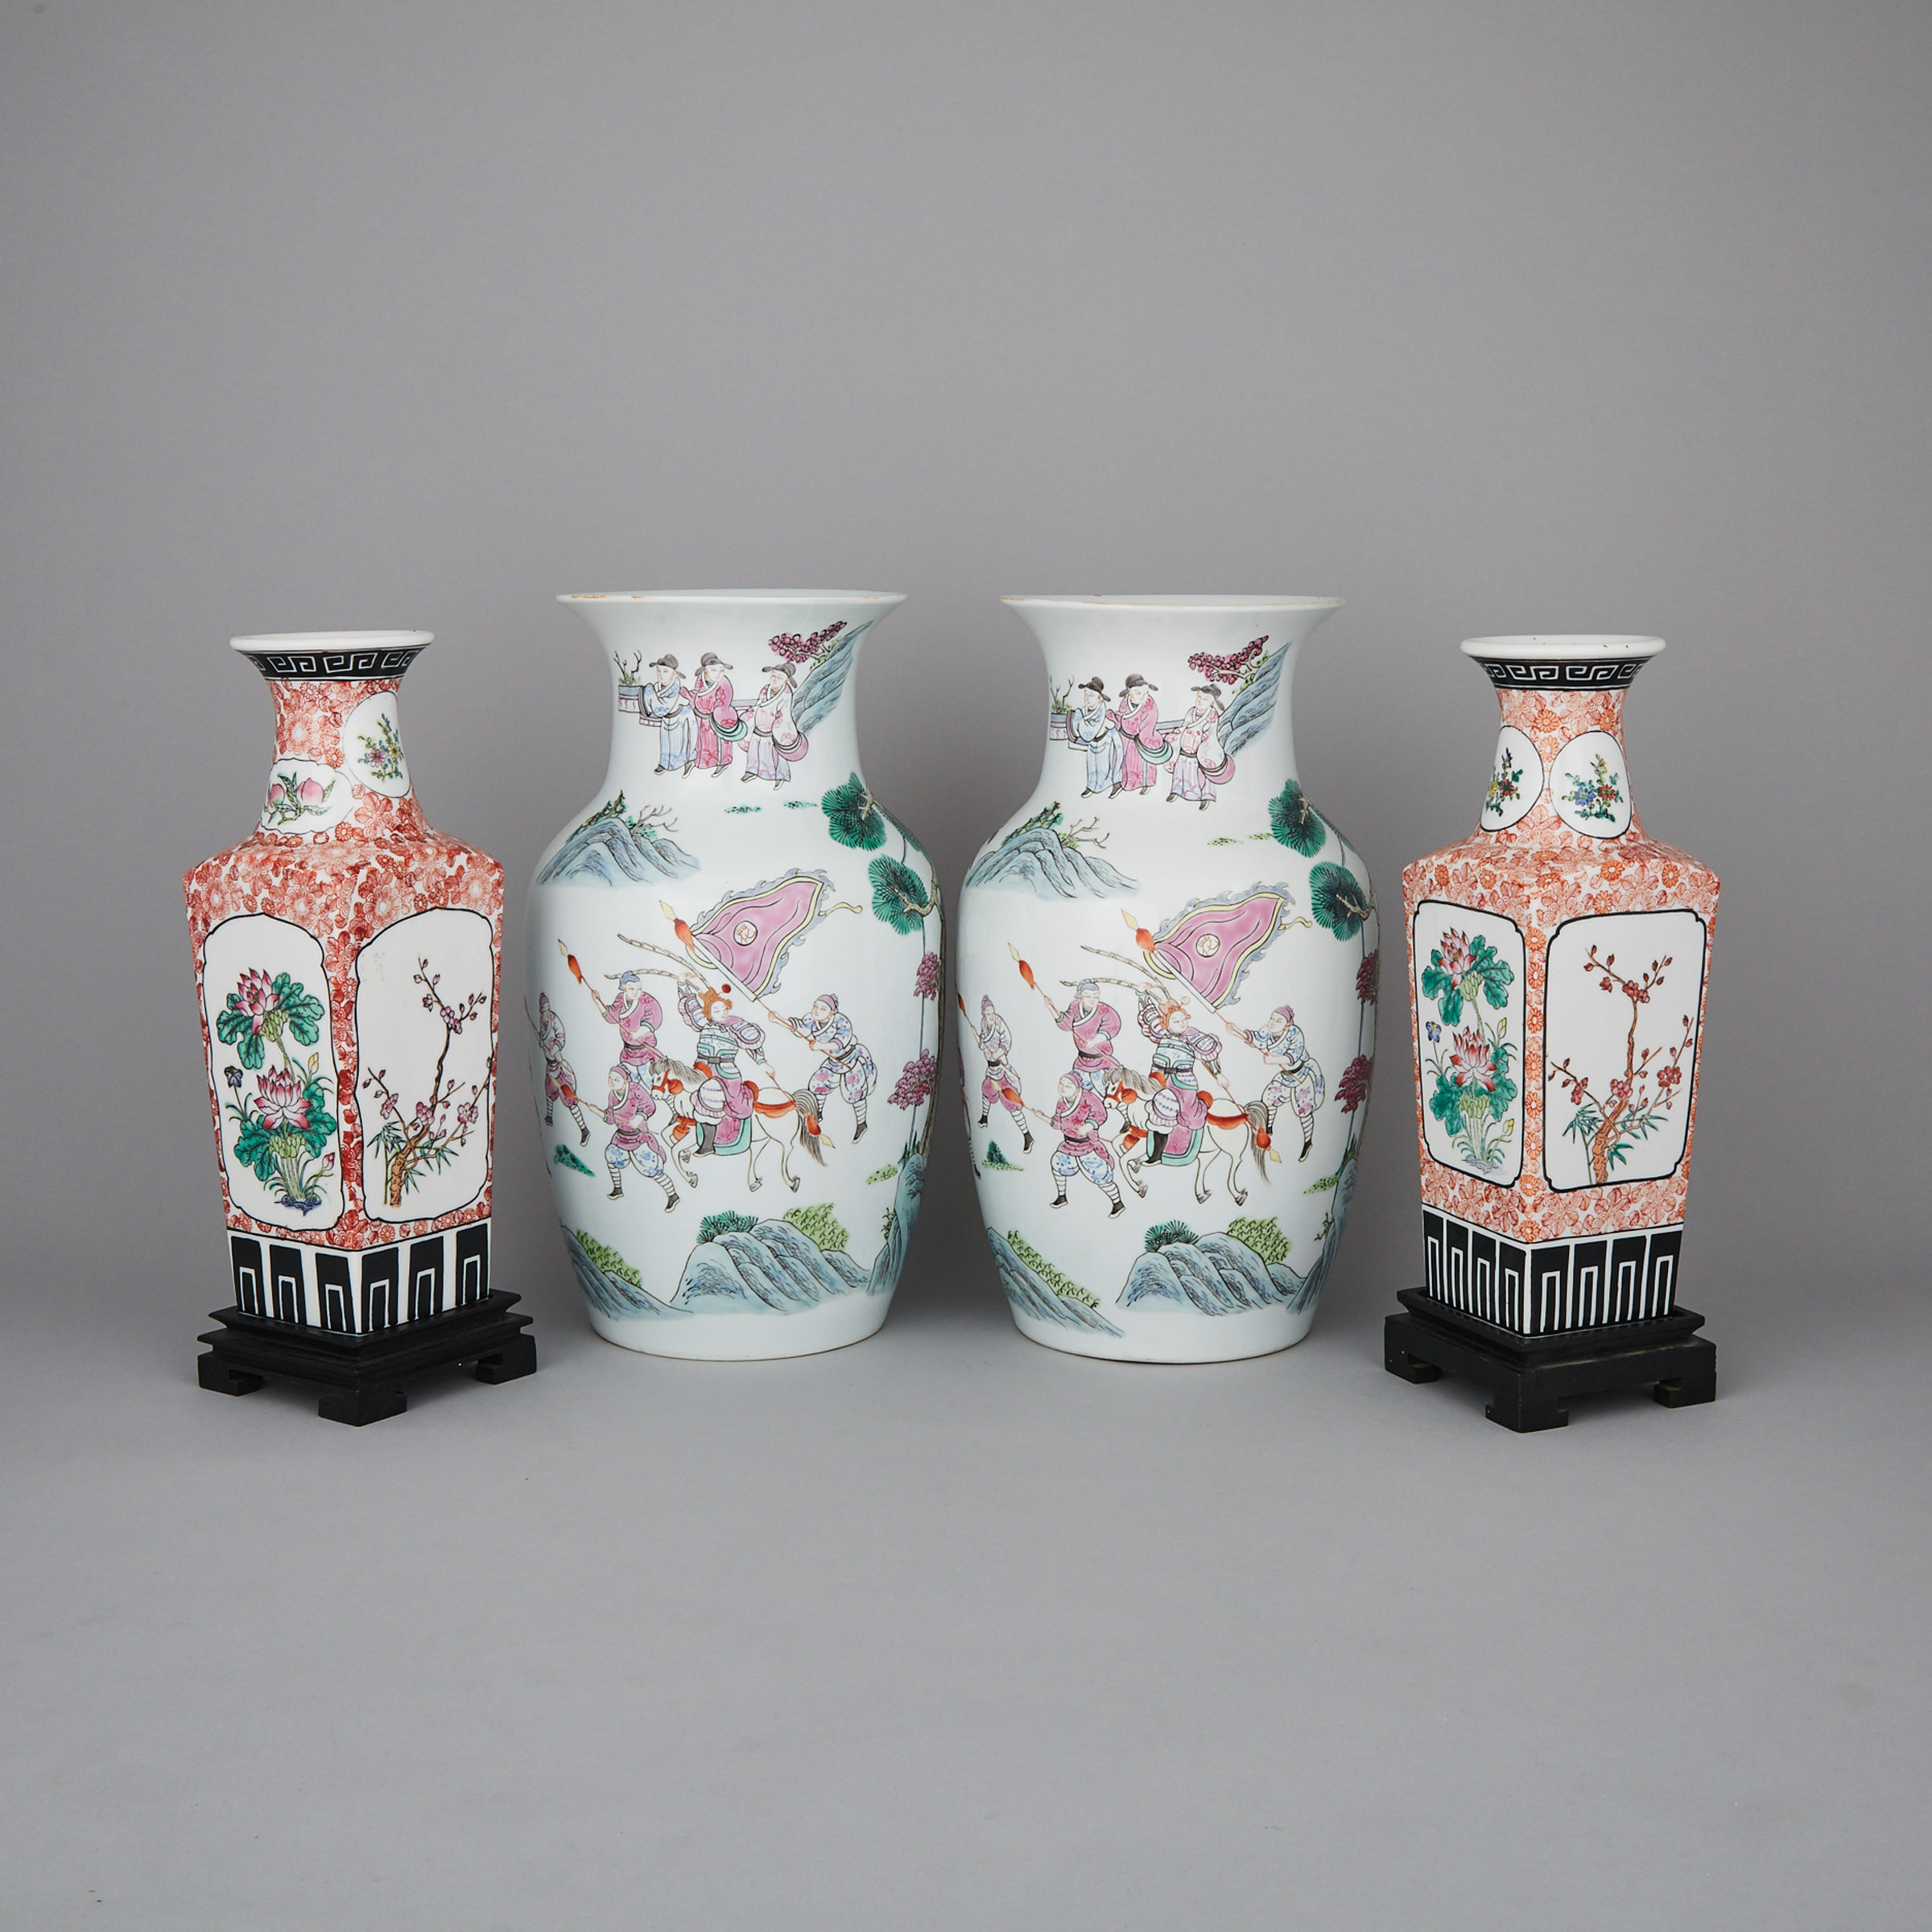 A Group of Four Chinese Porcelain Vases